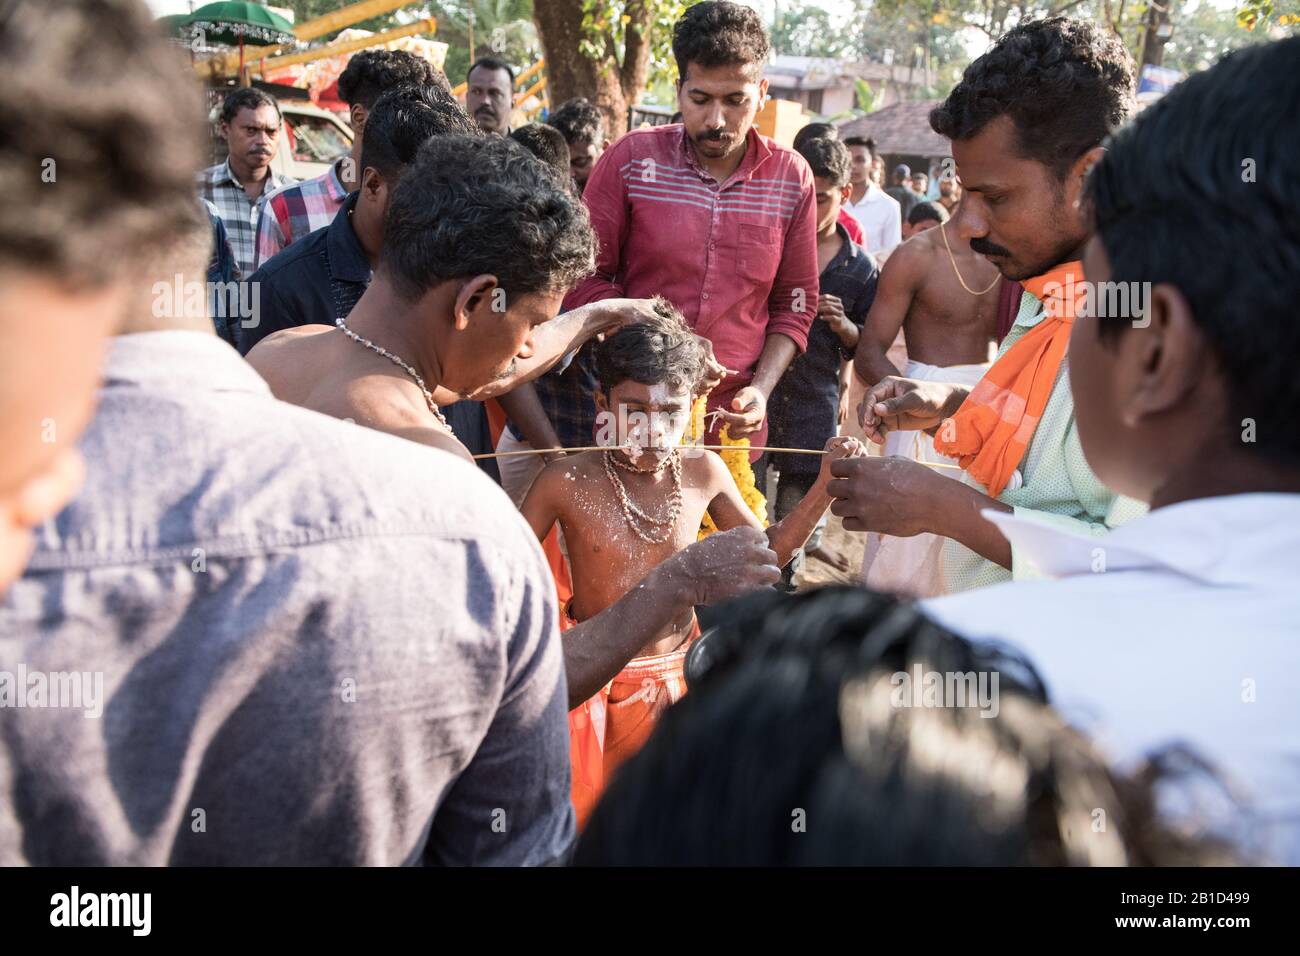 Devotees holding spears in their pierced mouths (Kavadi Aattam) as an act of devotion during Thaipooyam, or Thaipoosam, Festival in Kedakulam, Kerala. Stock Photo